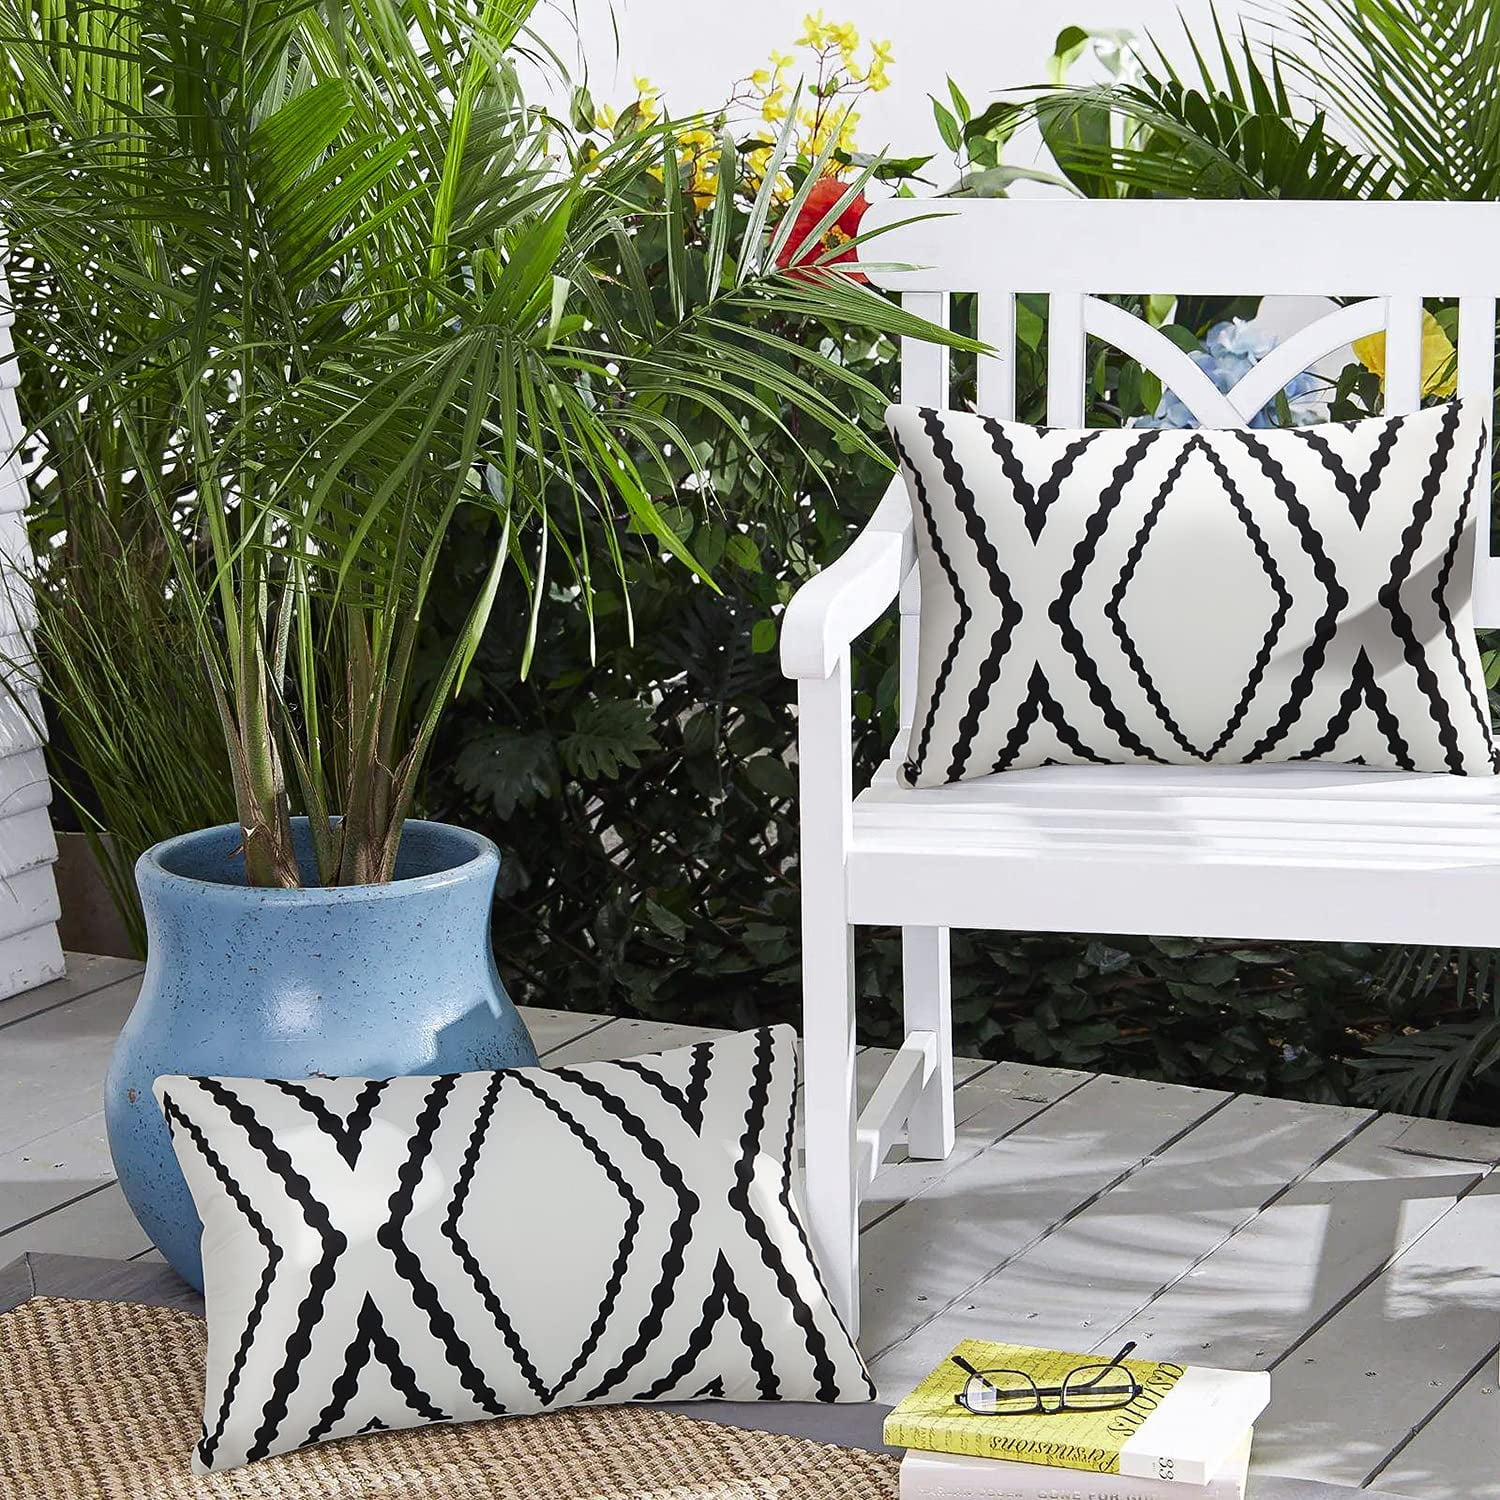 Adabana Outdoor Waterproof Boho Throw Pillow Covers Geometric Pillow Cases for Patio Garden Set of 2 18 X 18 Inches White